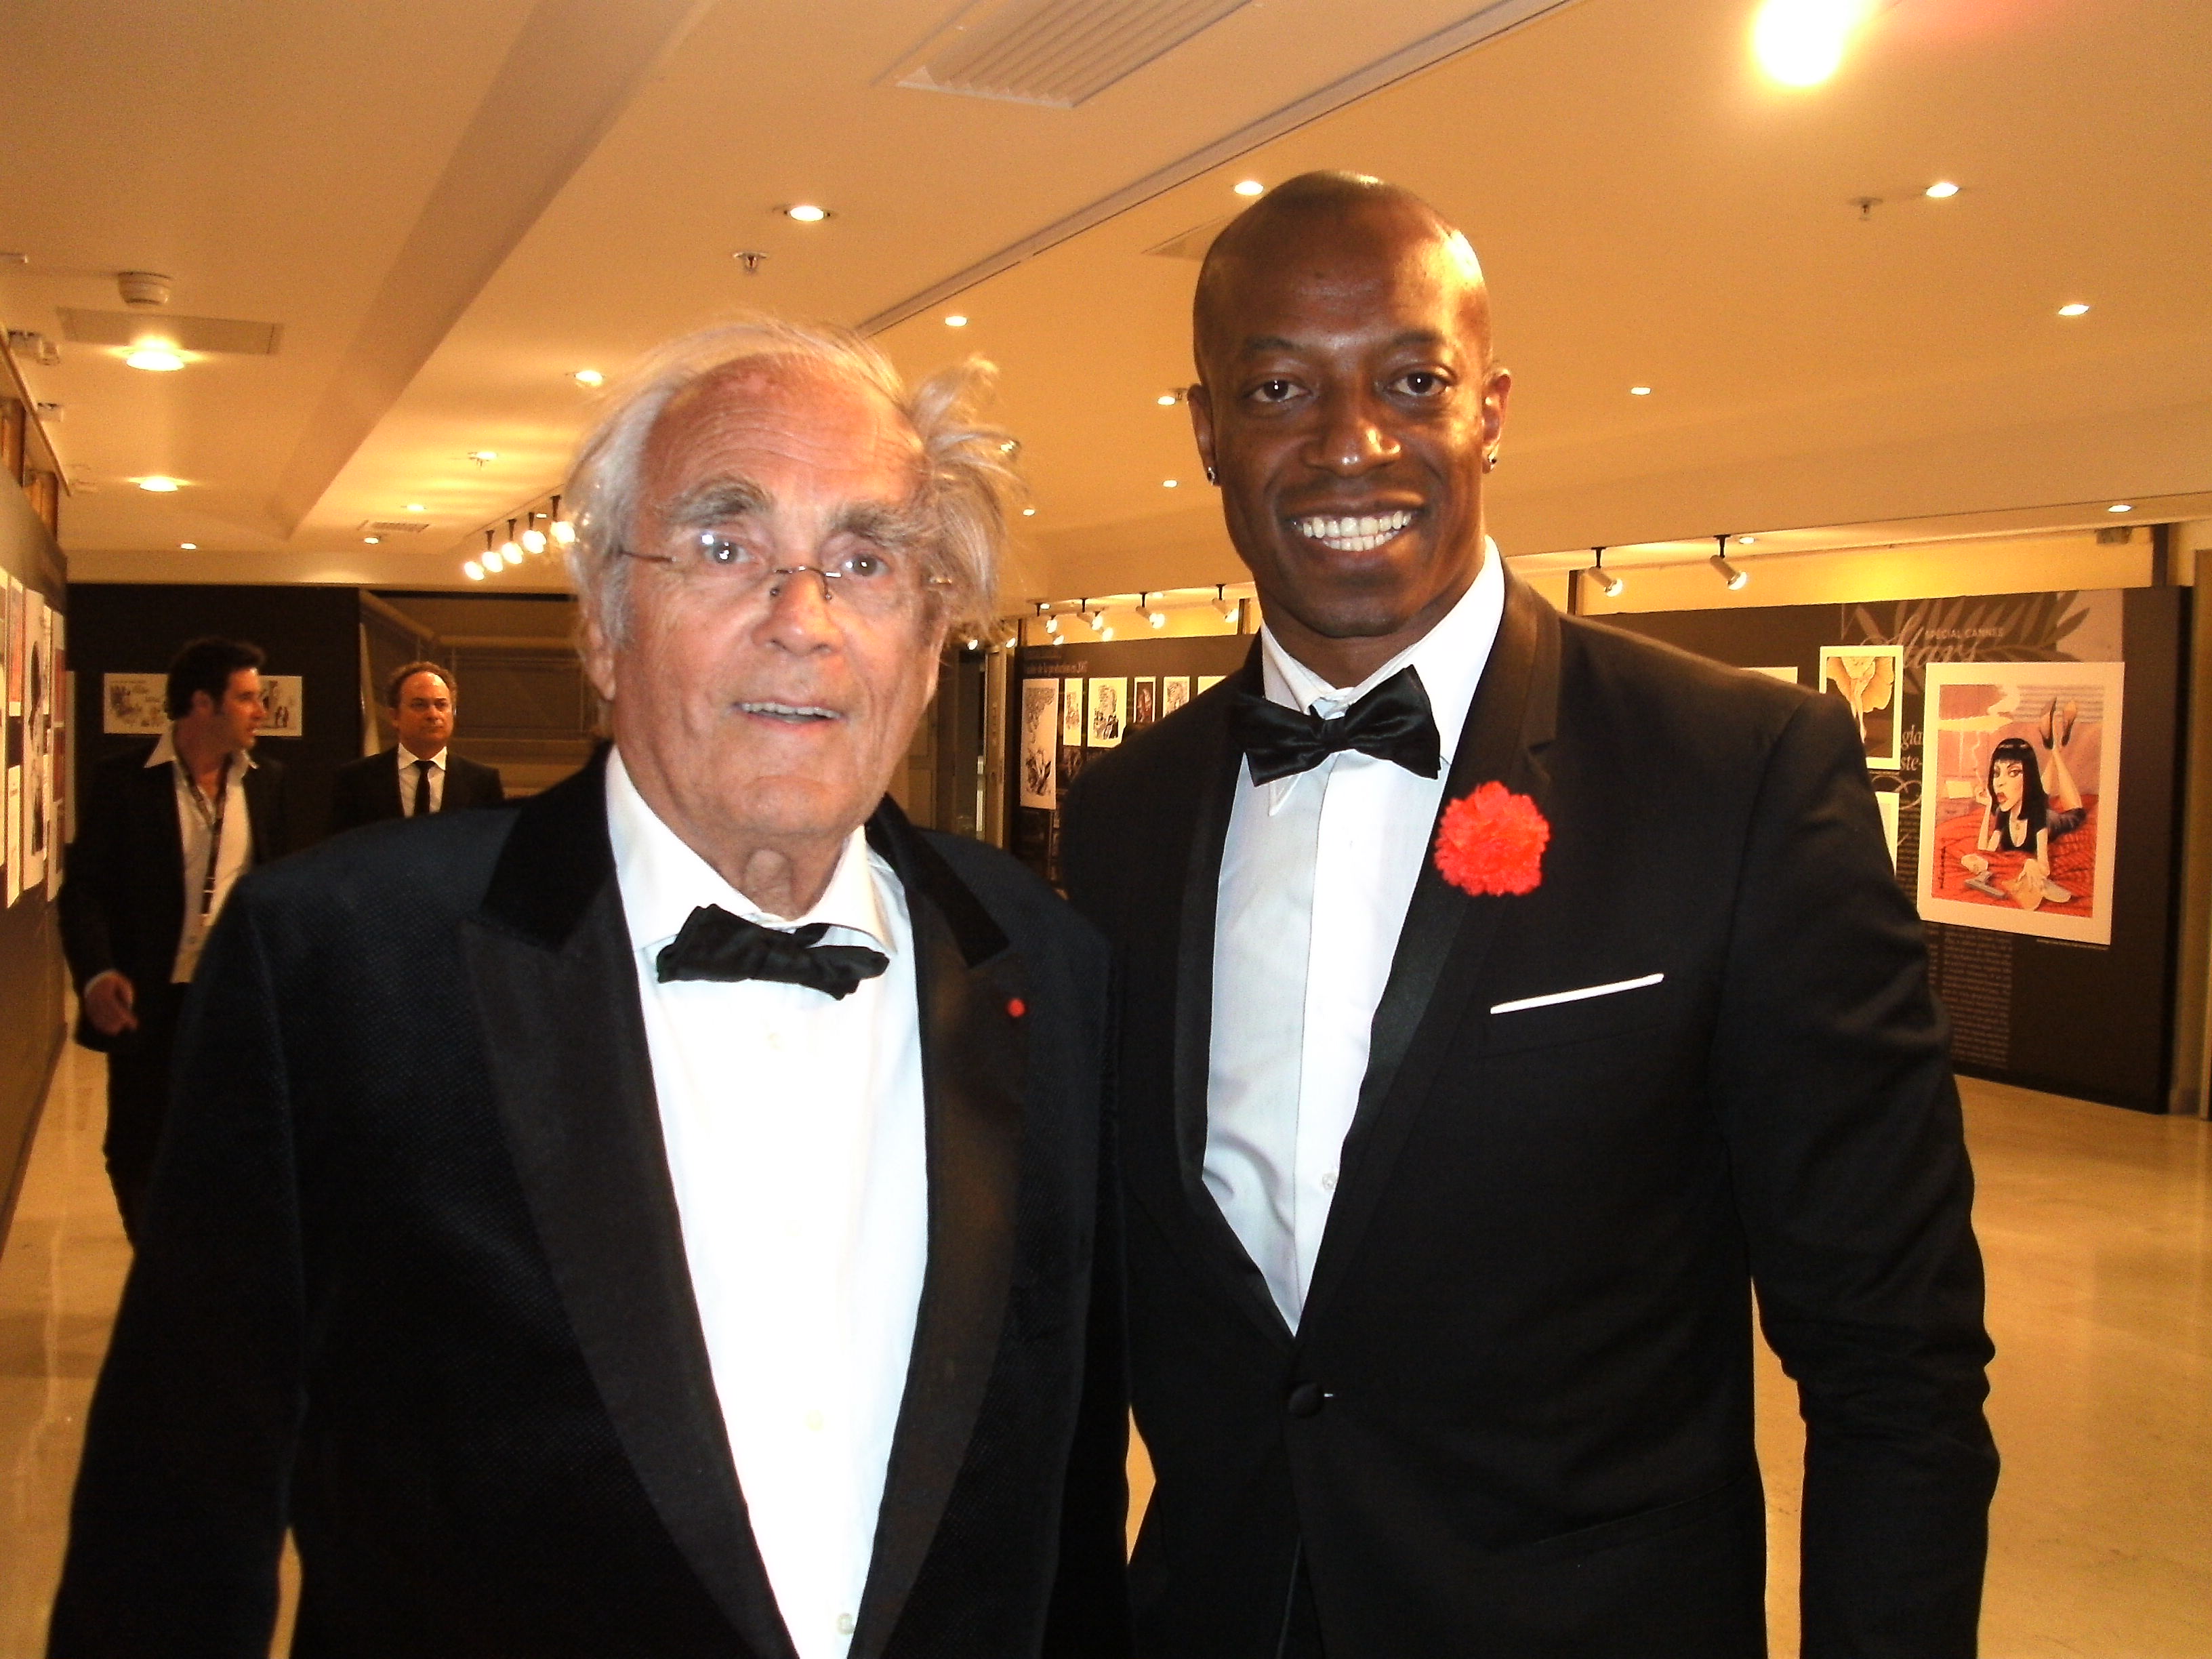 The French composer Michel Legrand & Eebra Tooré at Cannes Film Festival 2013.